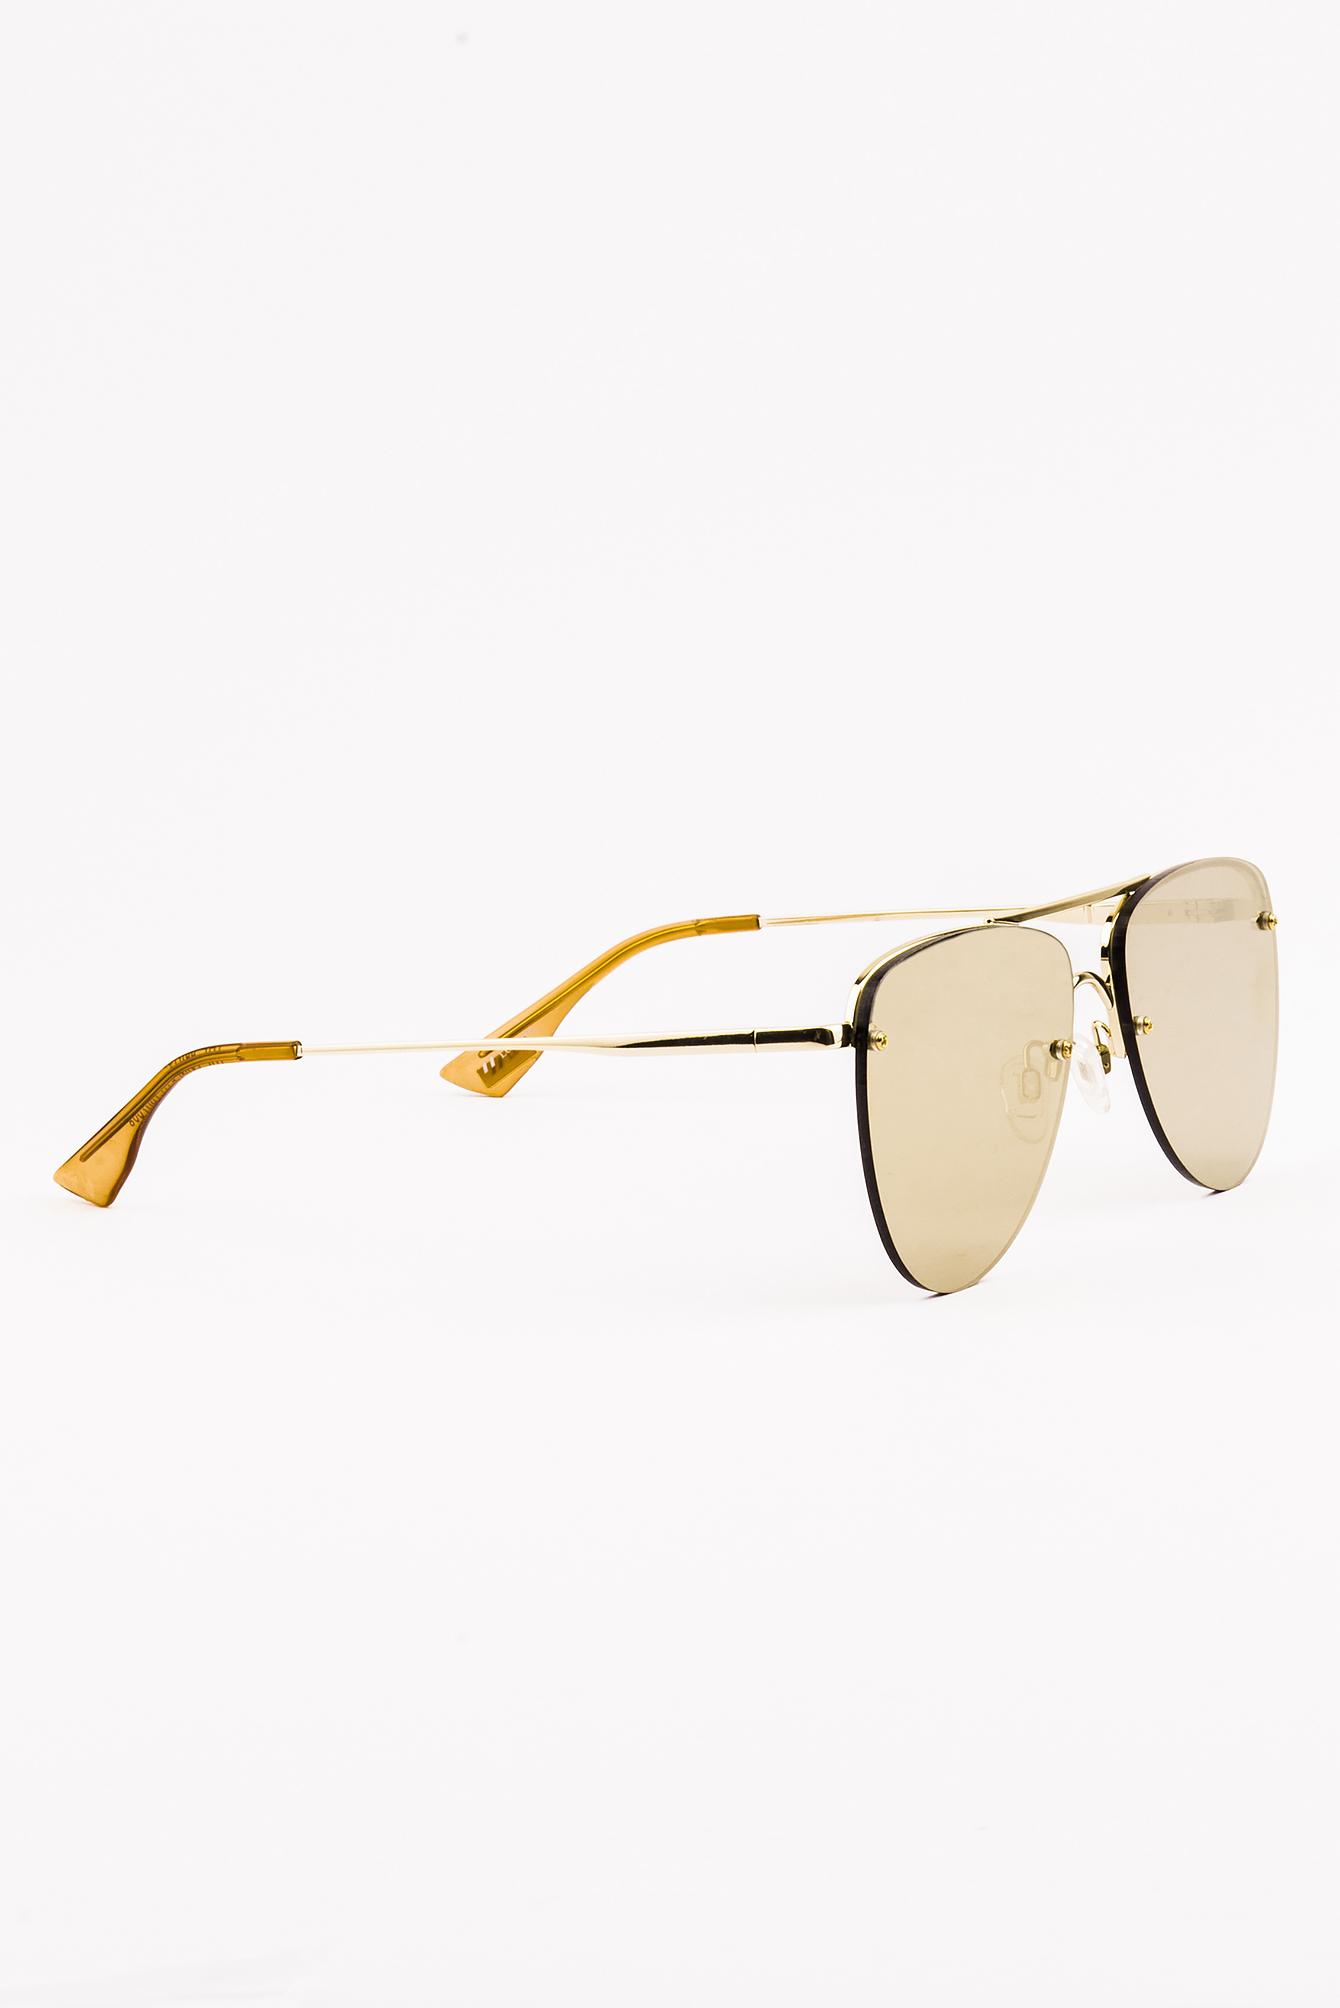 Le Specs The Prince Gold/tan | Lyst